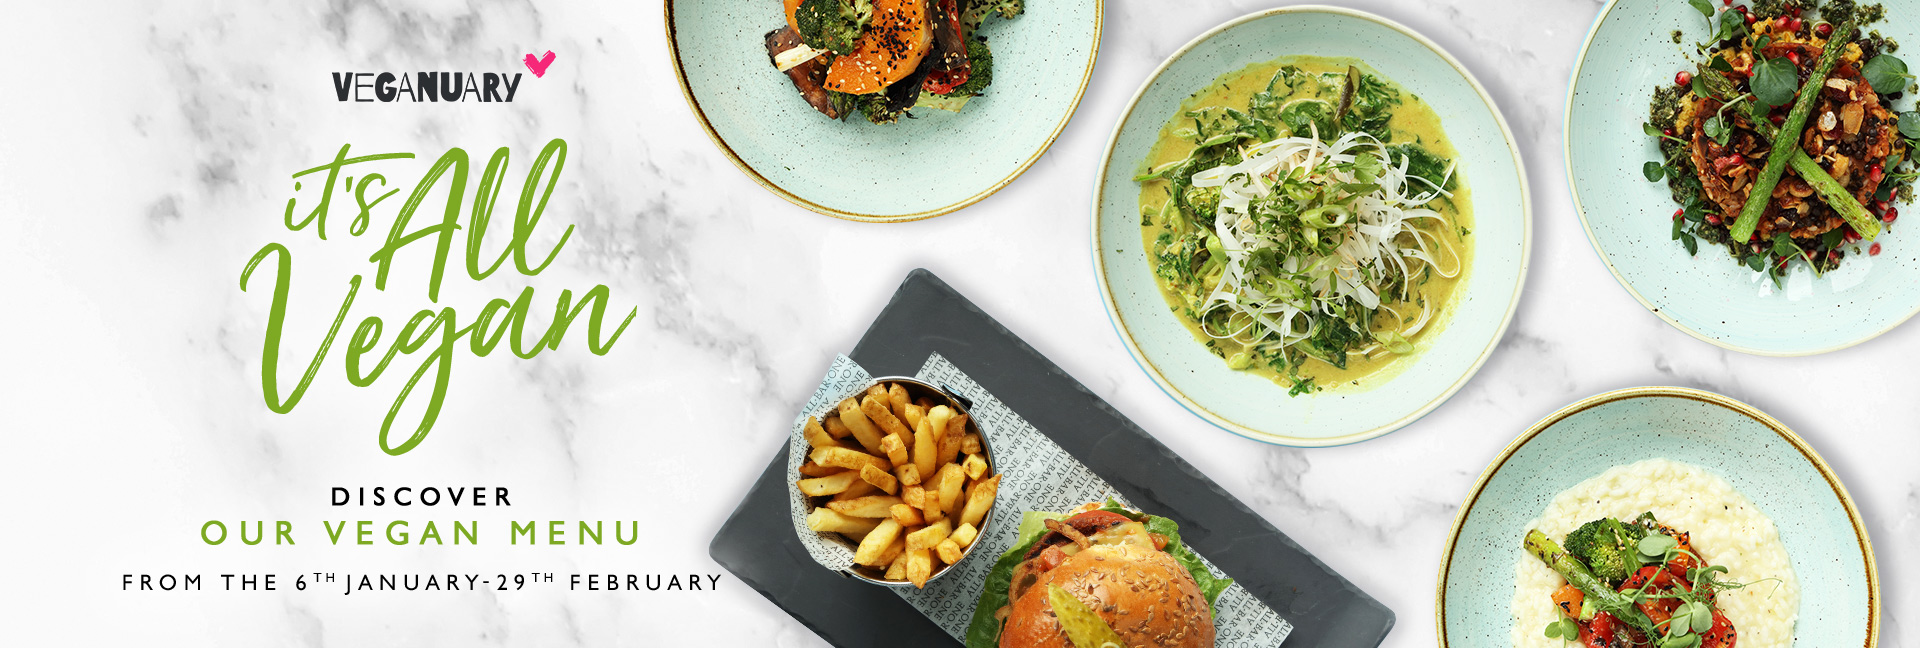 Veganuary Menu at All Bar One Covent Garden